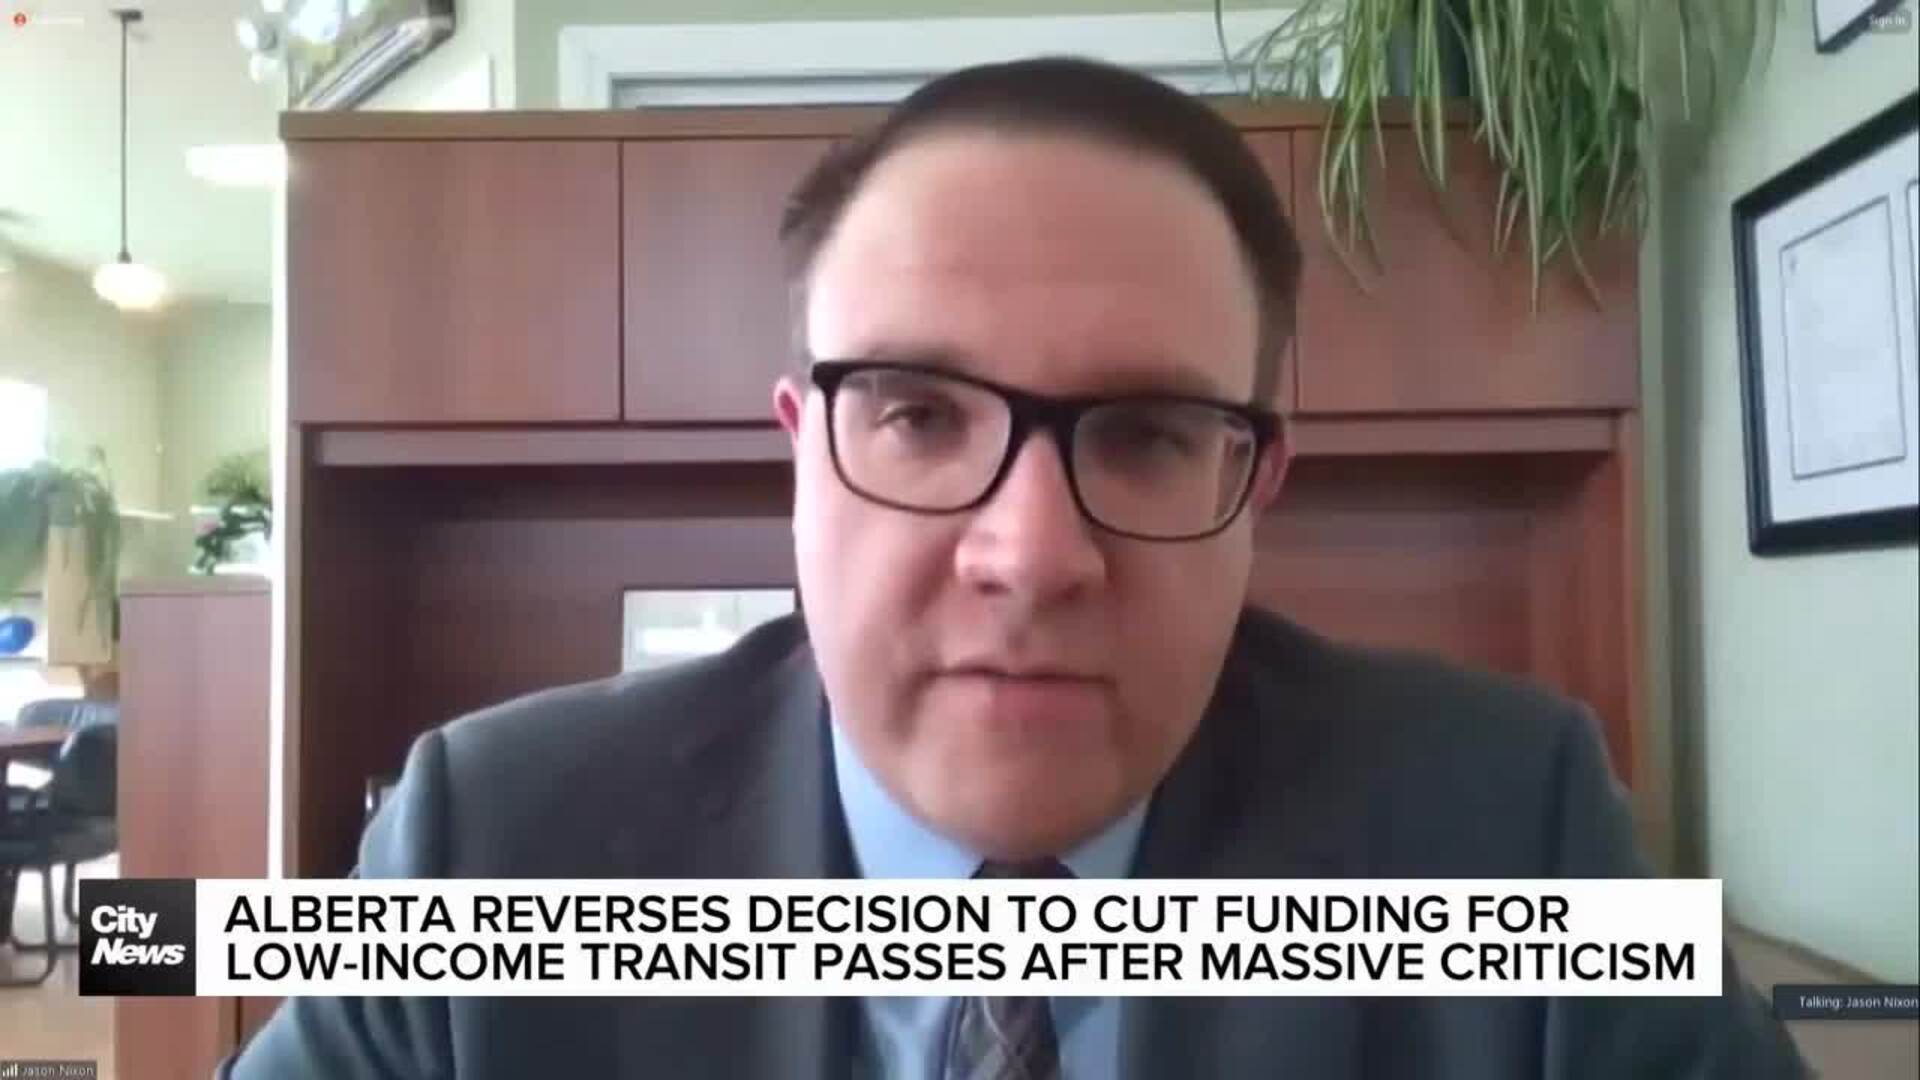 Alberta reverses decision to cut funding for low-income transit passes